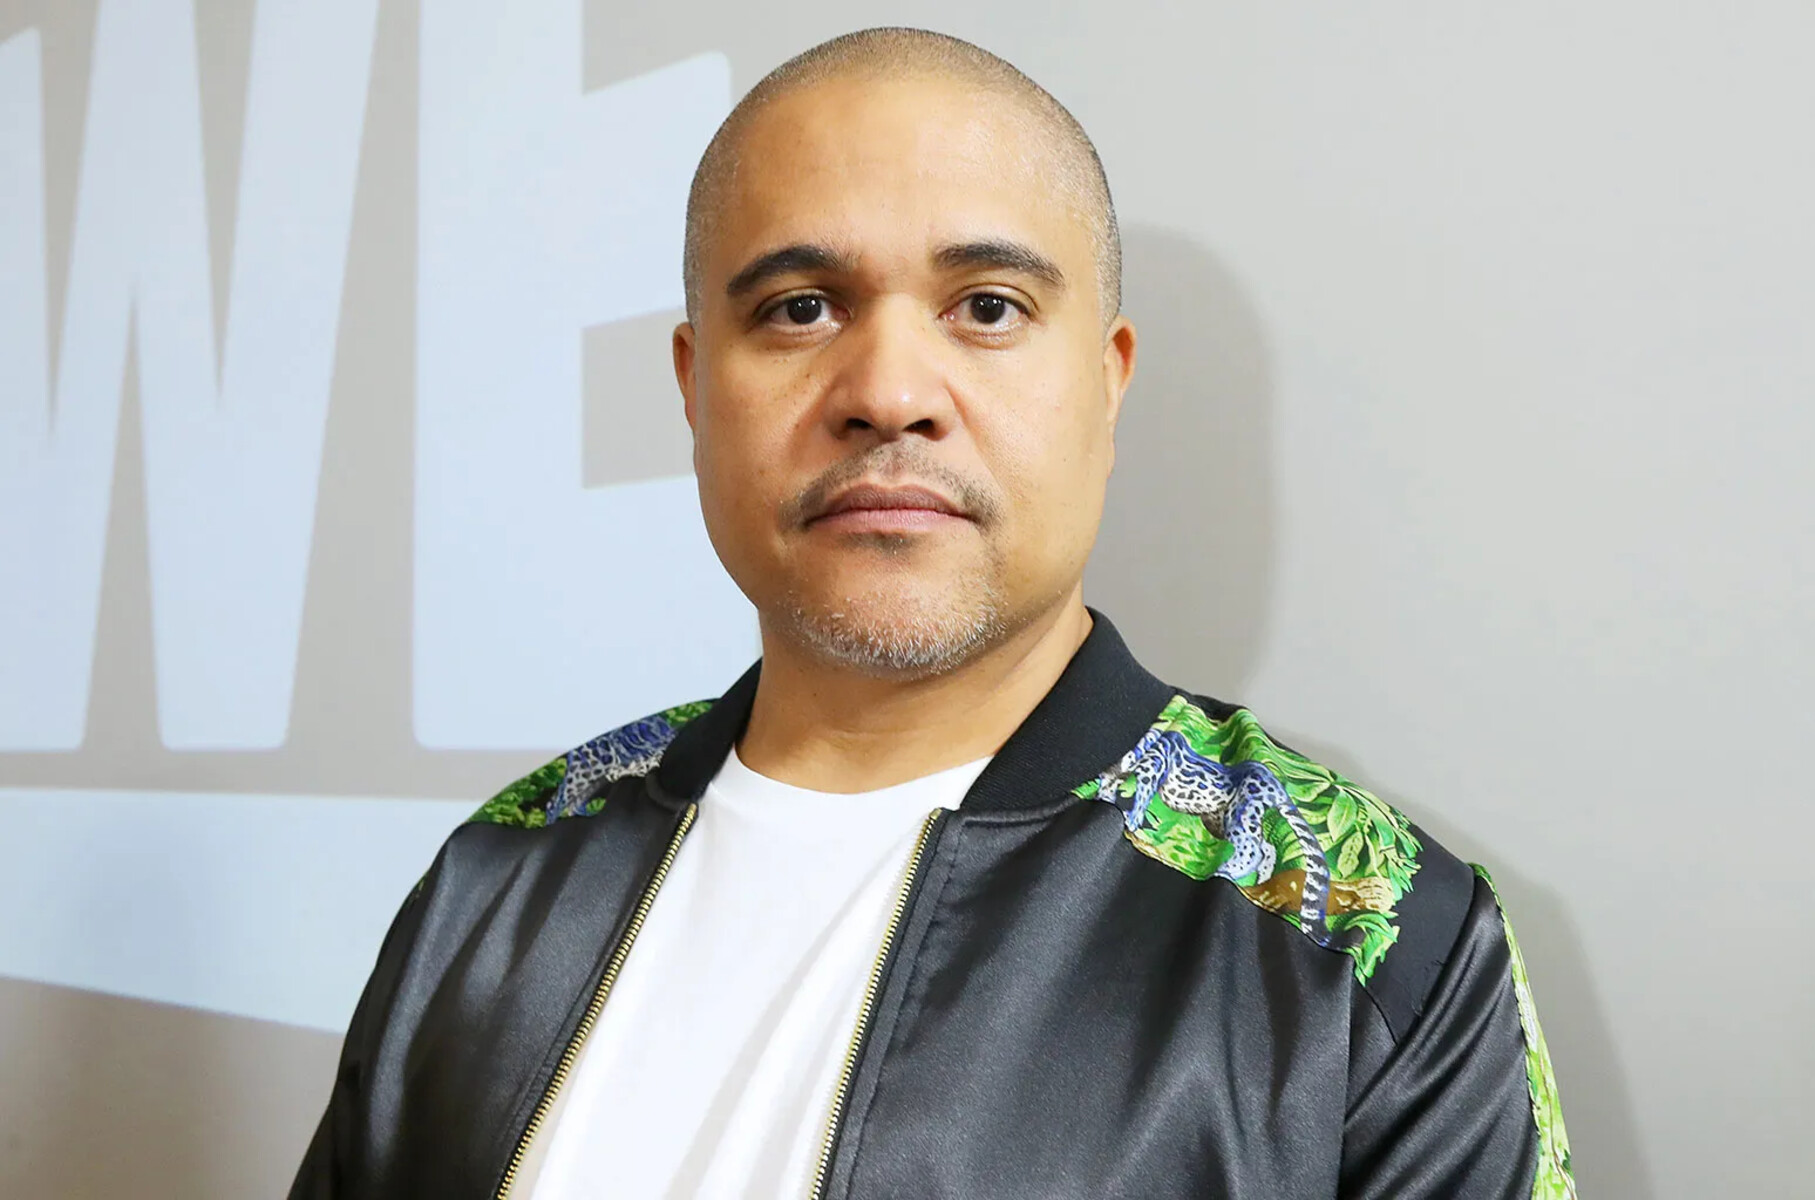 25-captivating-facts-about-irv-gotti